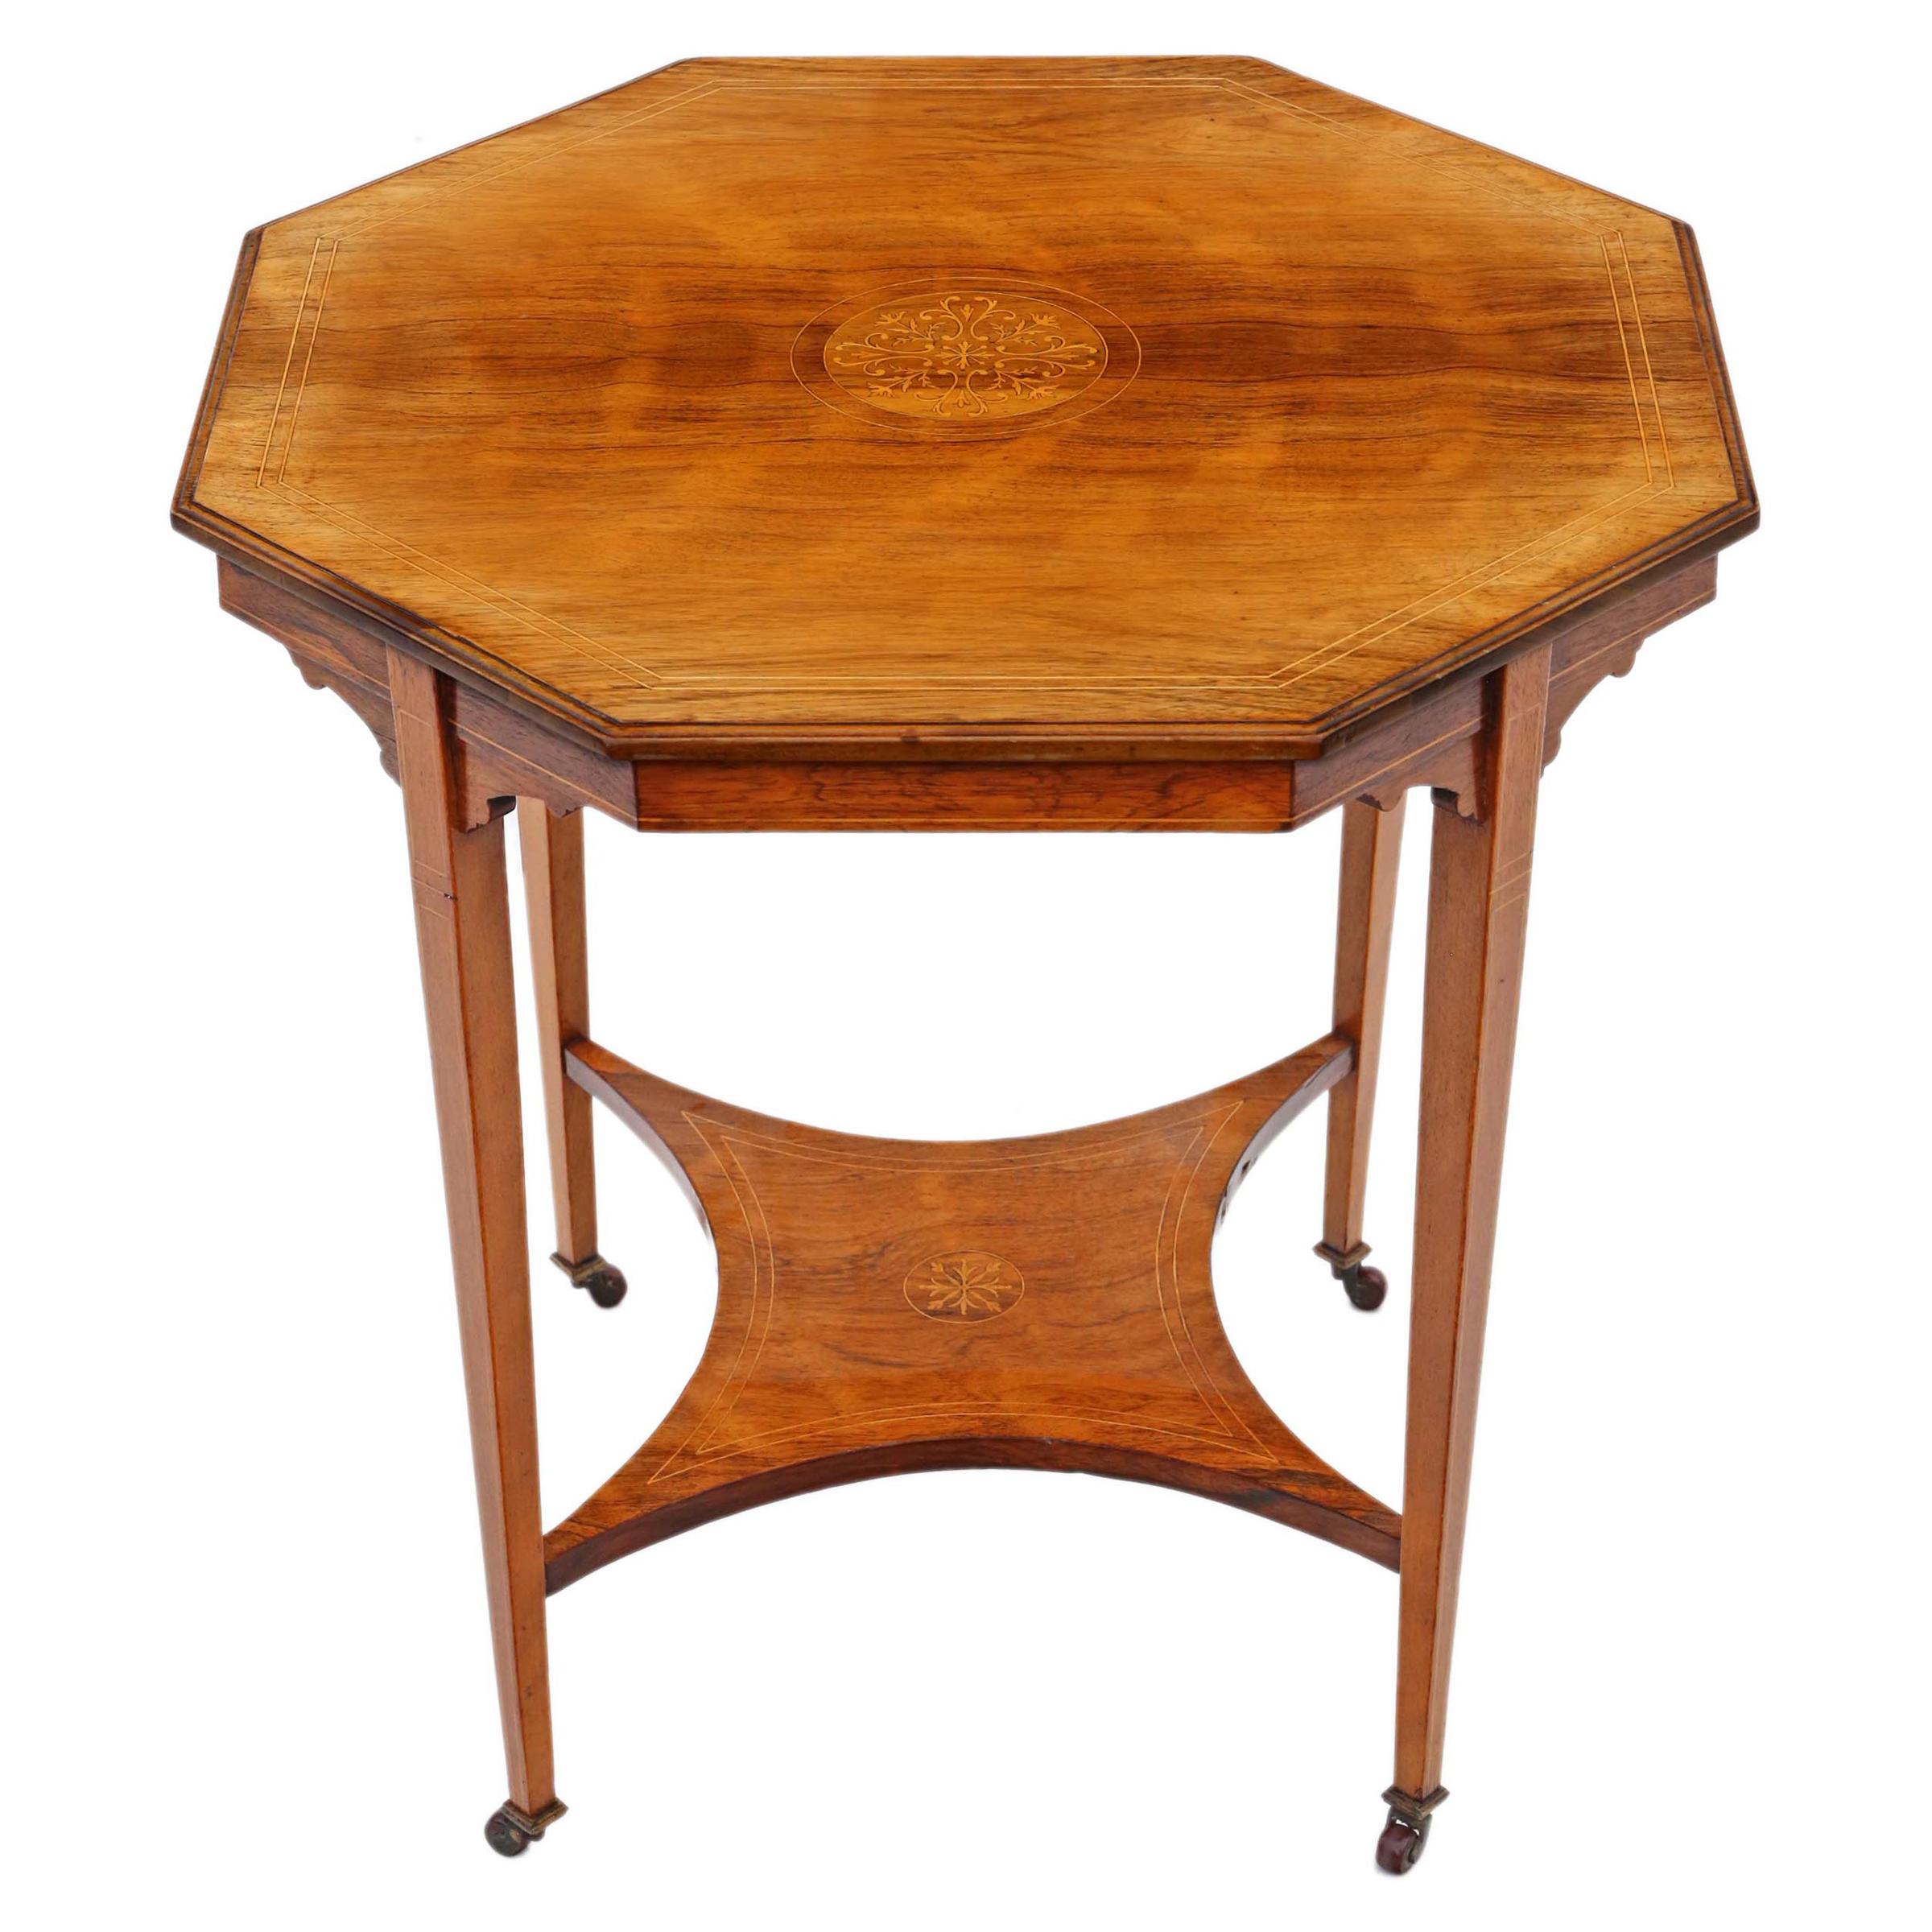 Handmade Rosewood Indian Inlaid Table Occasional Table/Side Table 